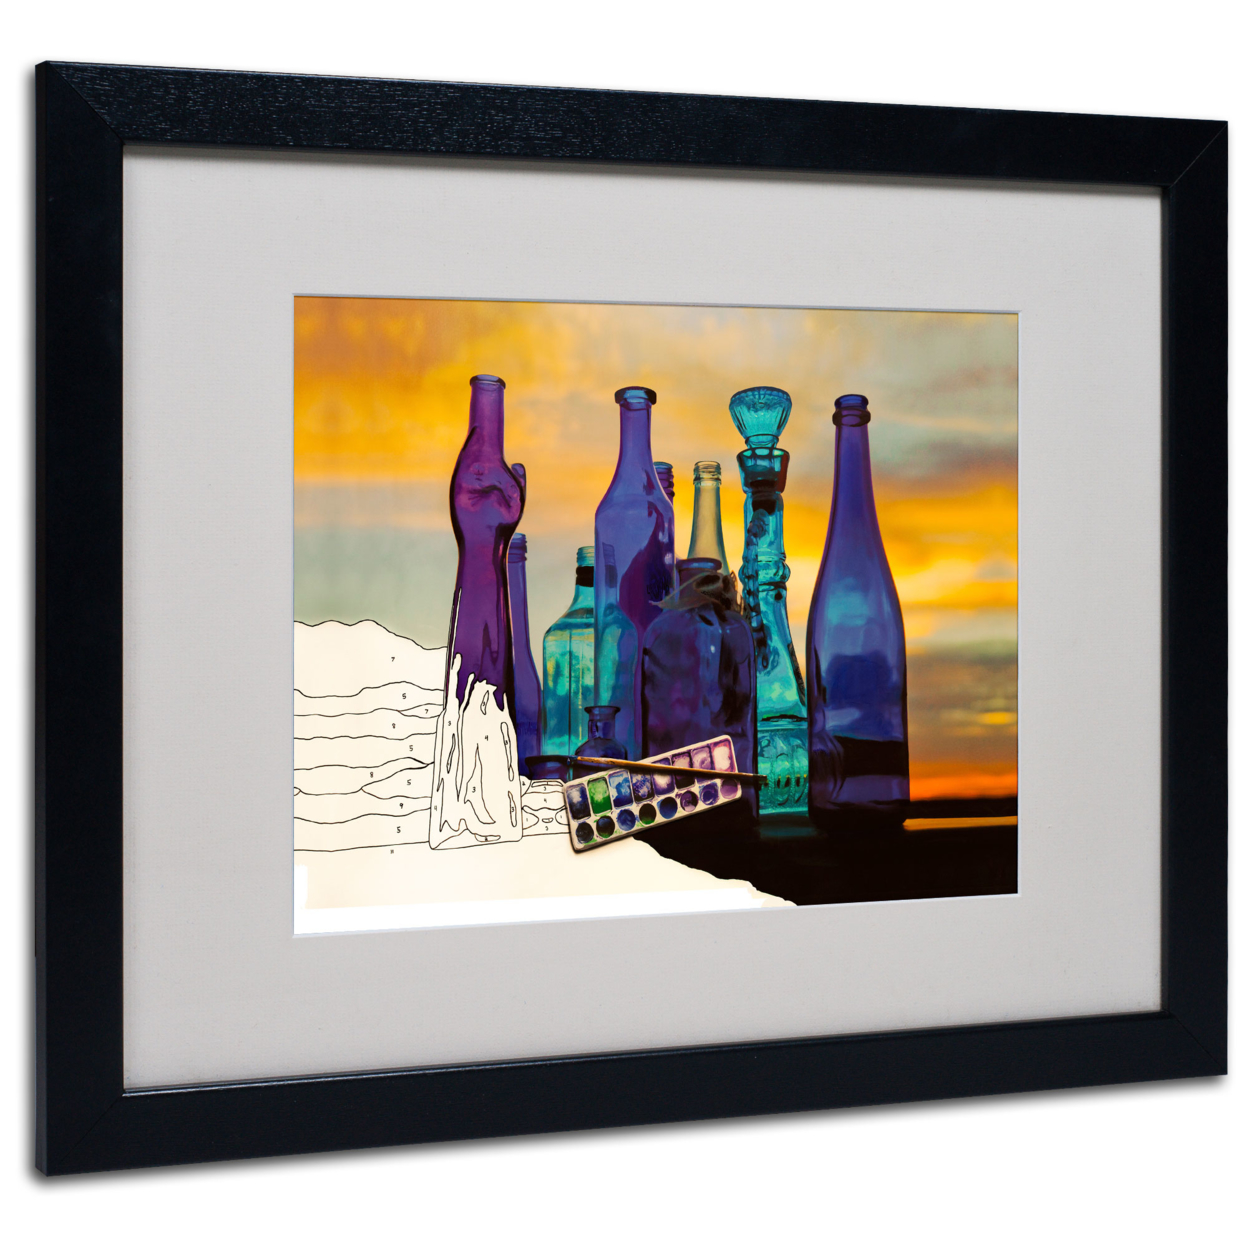 Roderick Stevens 'Blue Sunset By Numbers' Black Wooden Framed Art 18 X 22 Inches